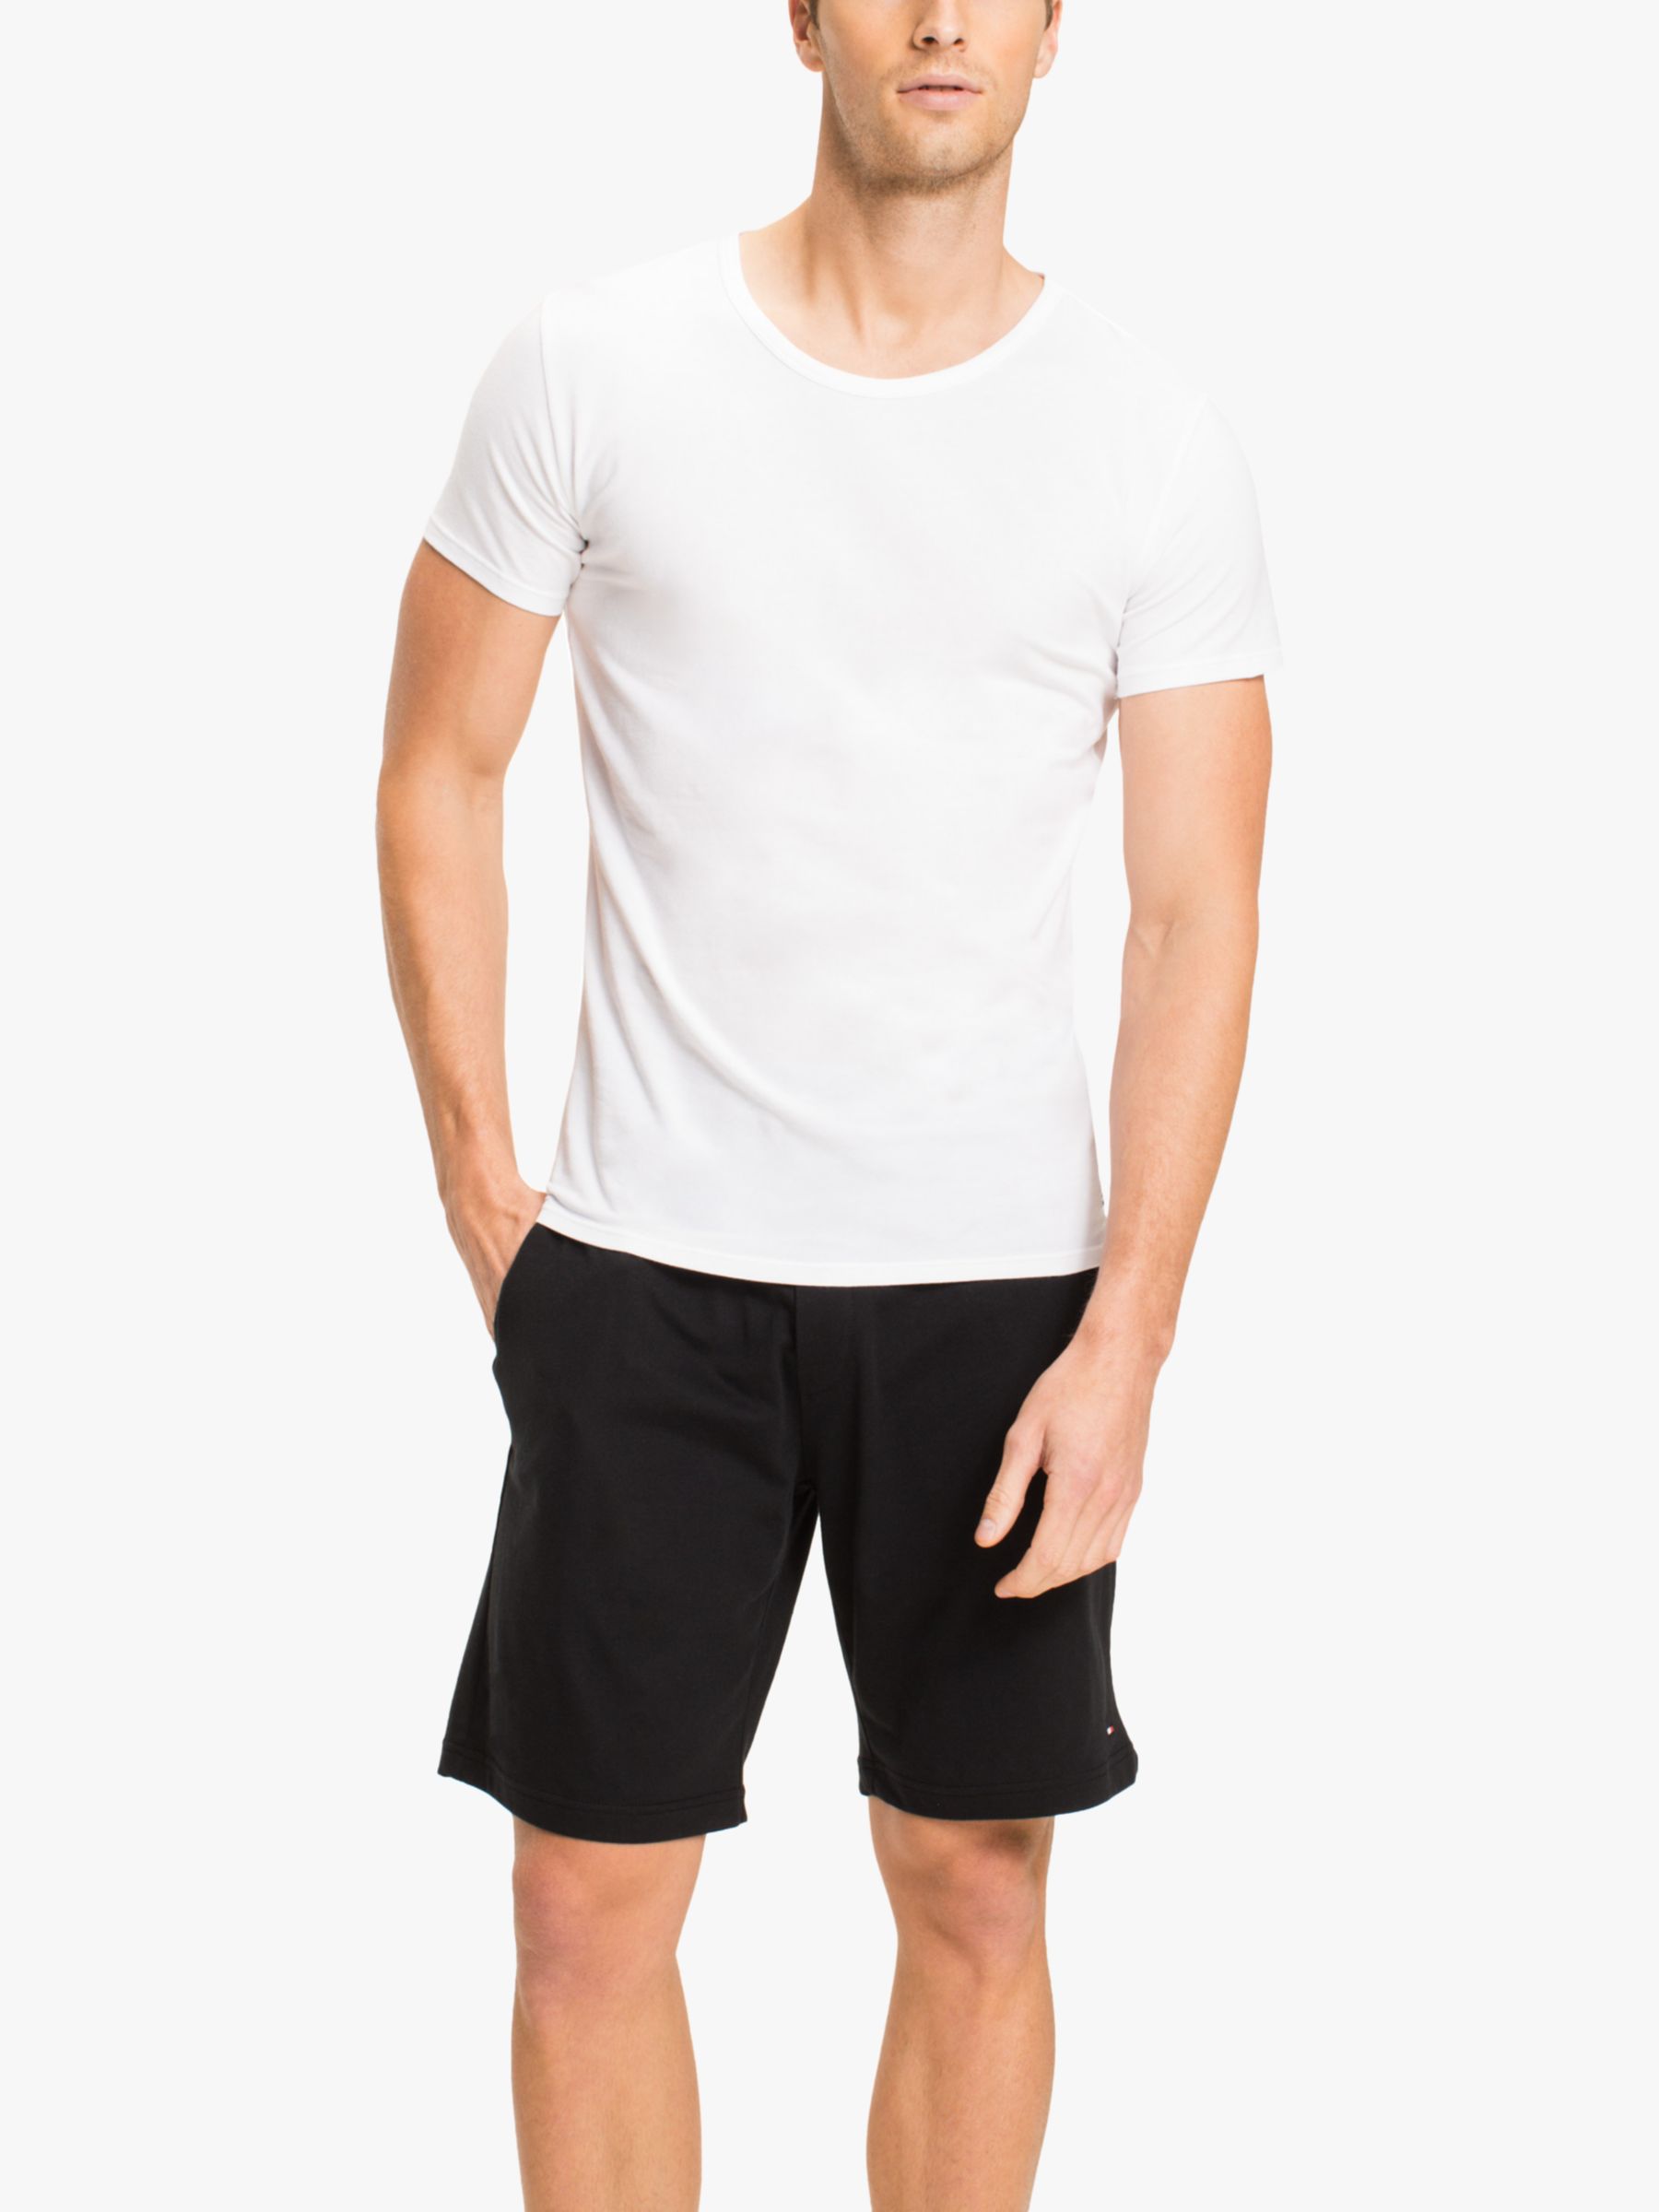 tempo engel lucht Tommy Hilfiger Cotton Lounge T-Shirt, Pack of 3, White at John Lewis &  Partners